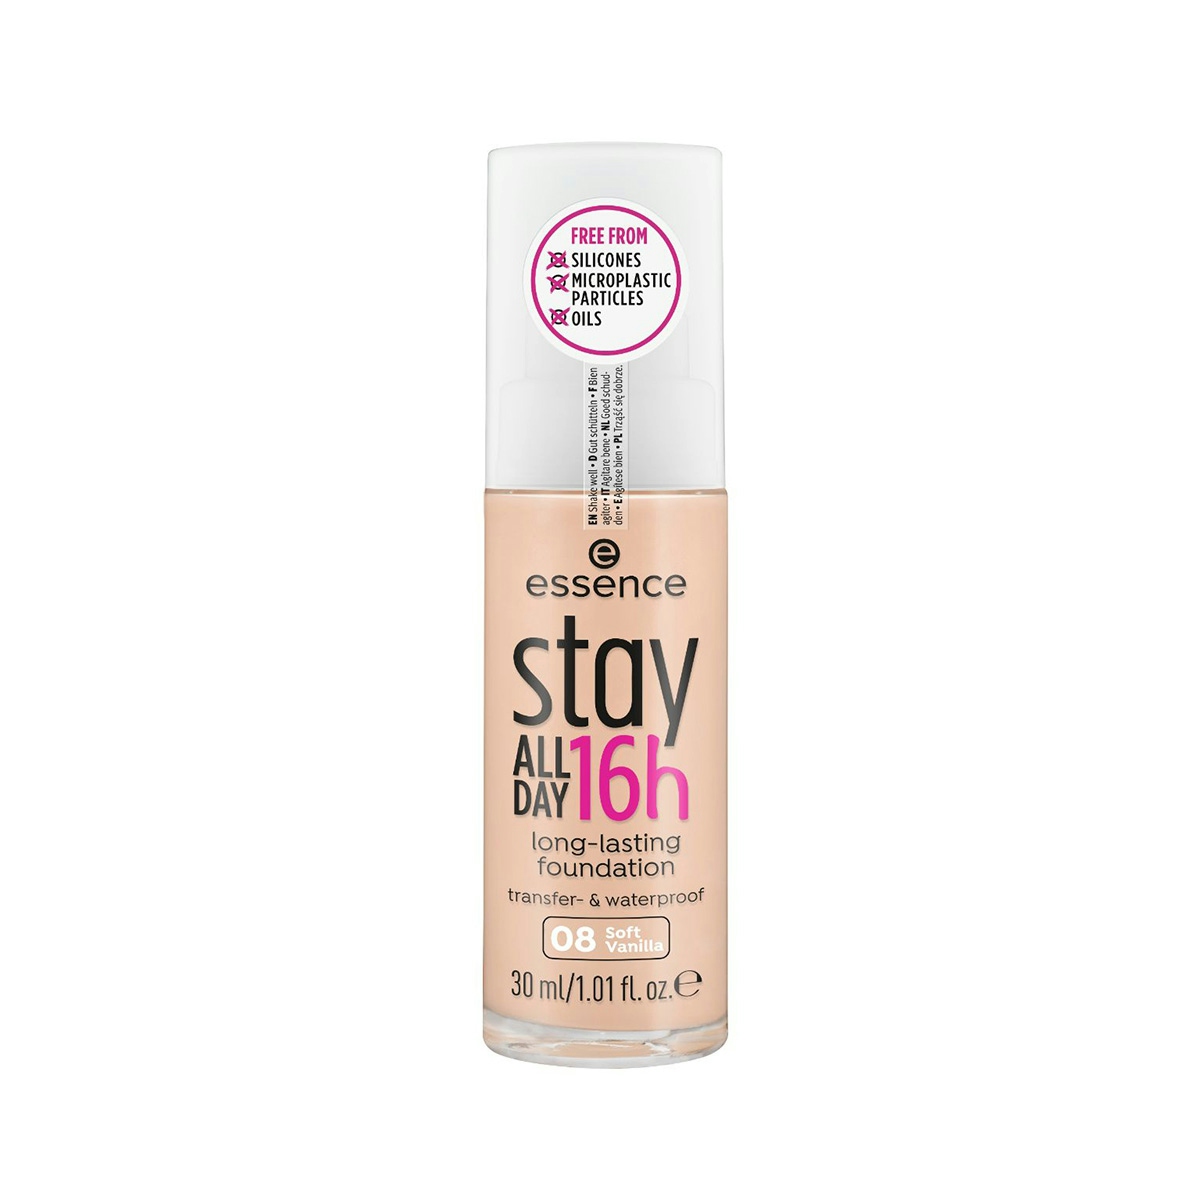 Base de Maquillaje Stay All day 16h long-lasting Essence